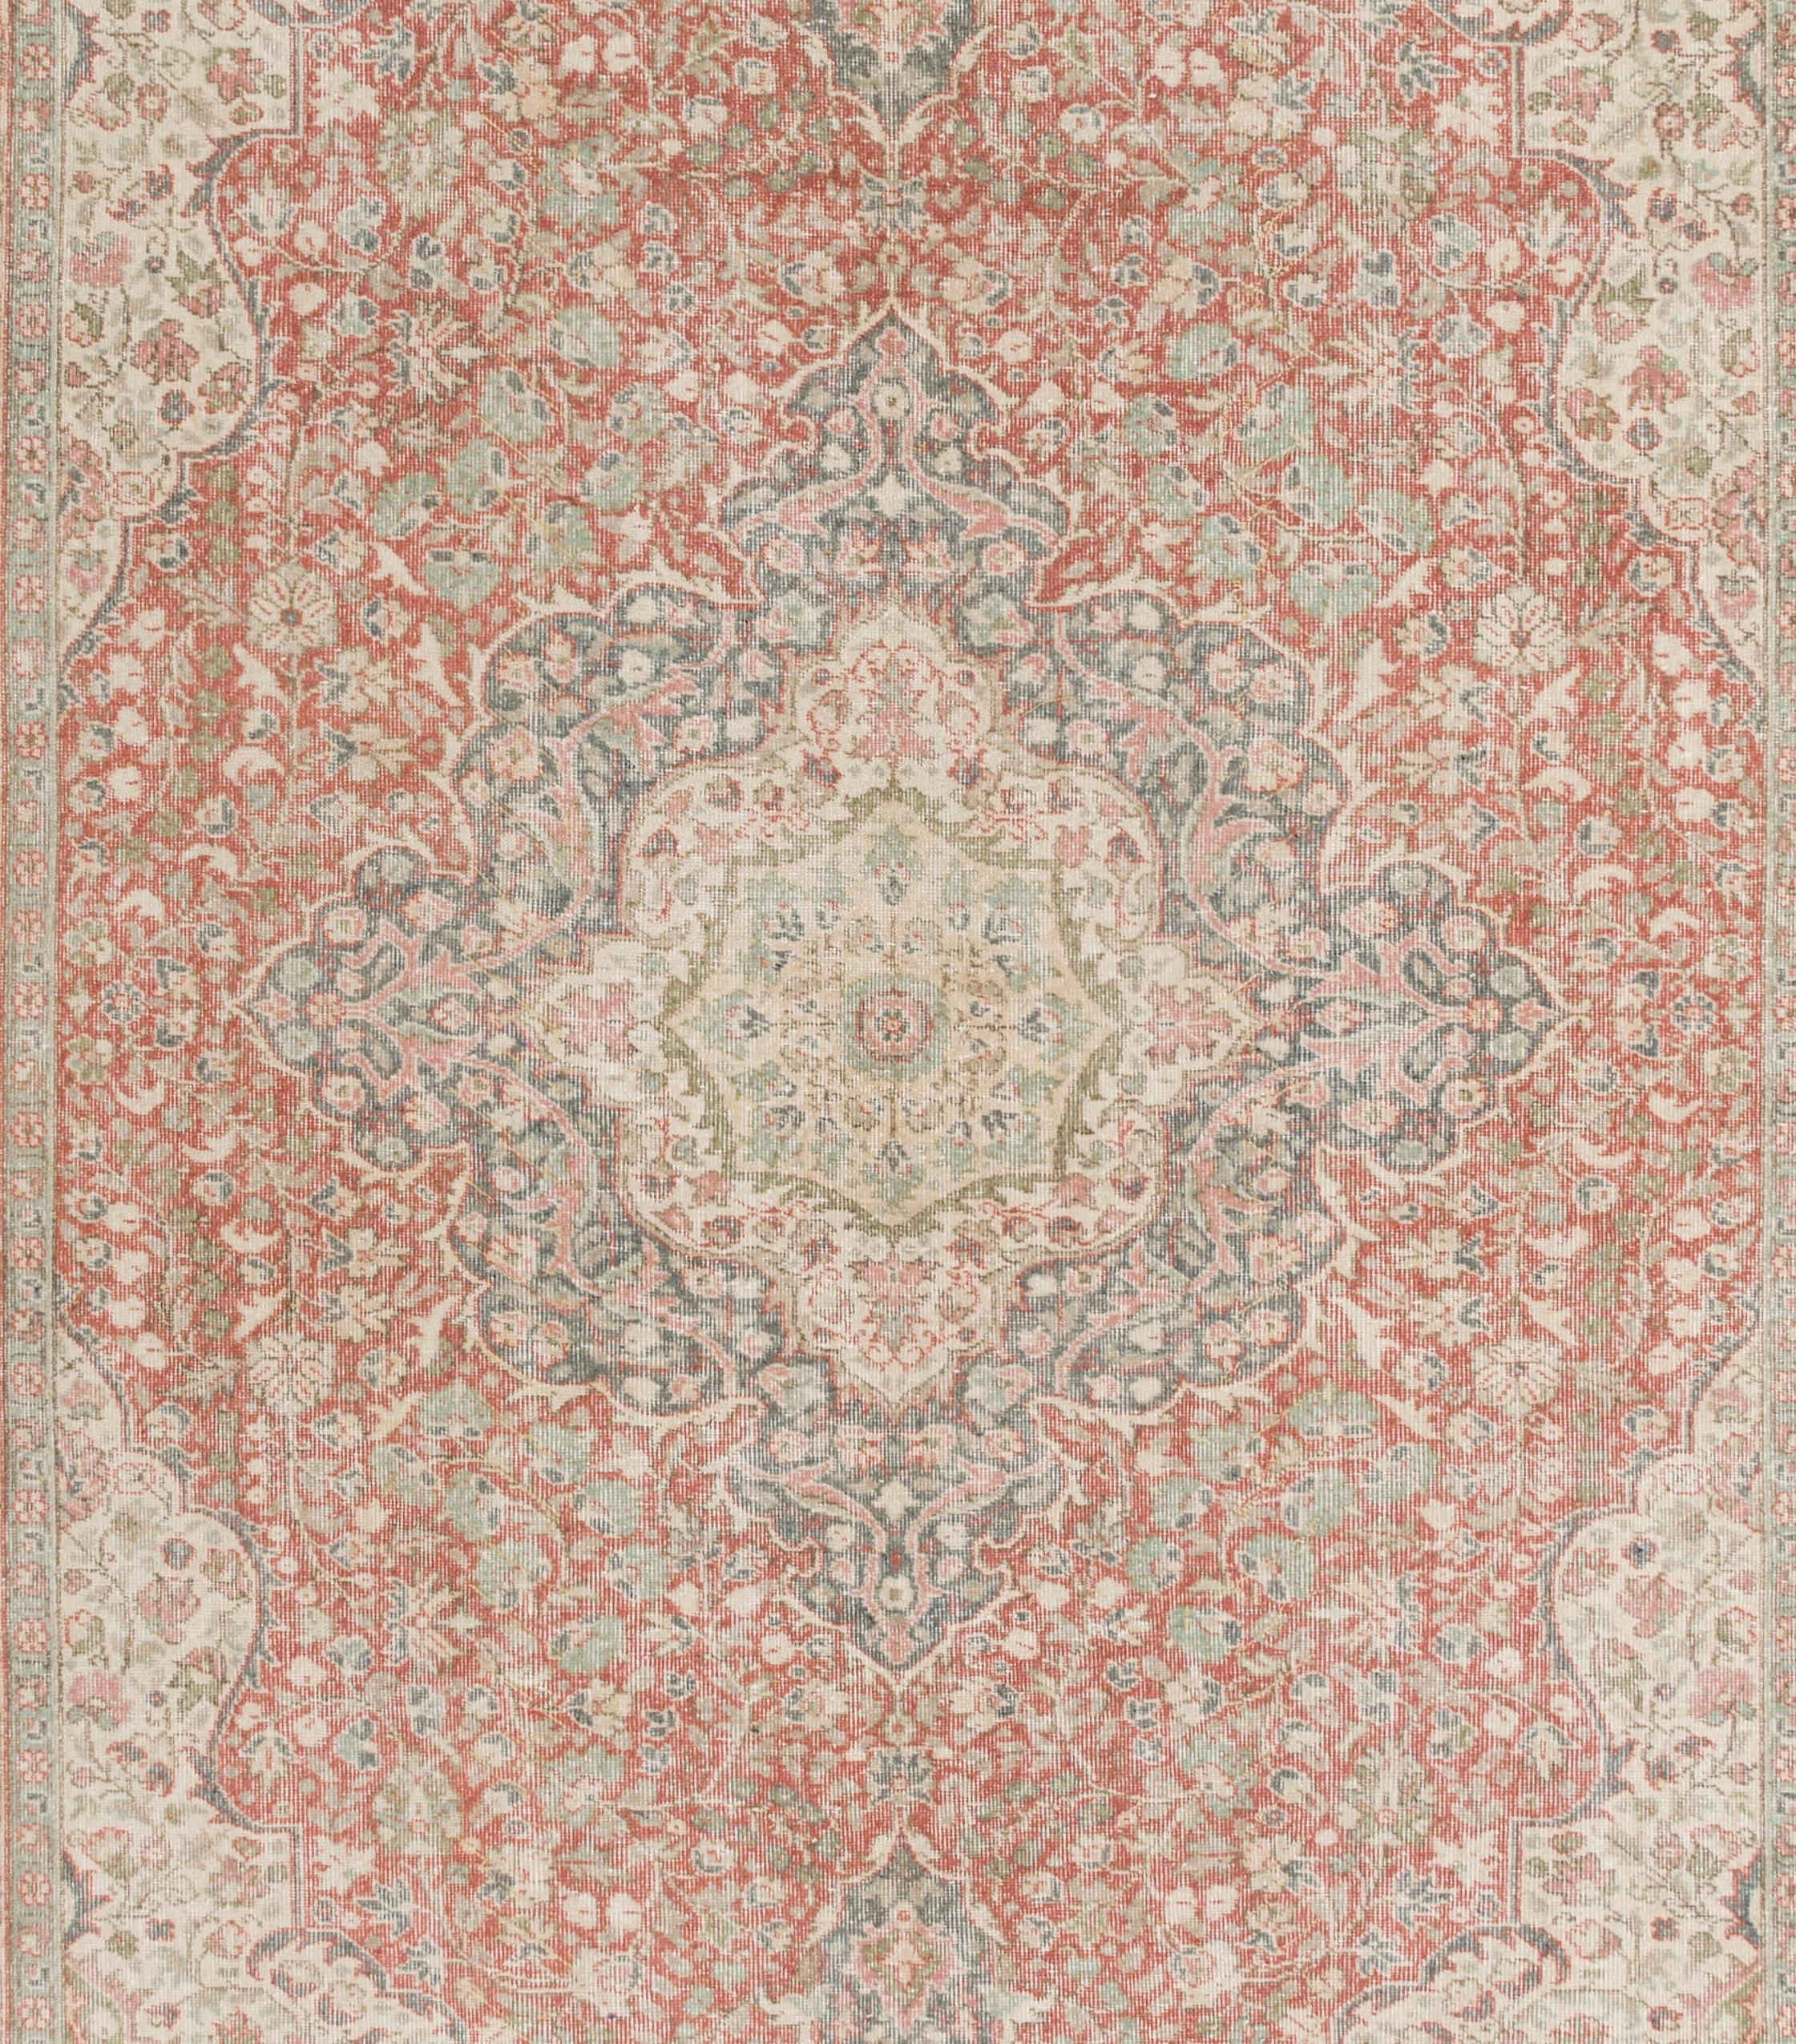 Hand-Knotted 8.8x13 Ft One-of-a-Kind Mid-20th Century Turkish Wool Area Rug in Muted Colors For Sale